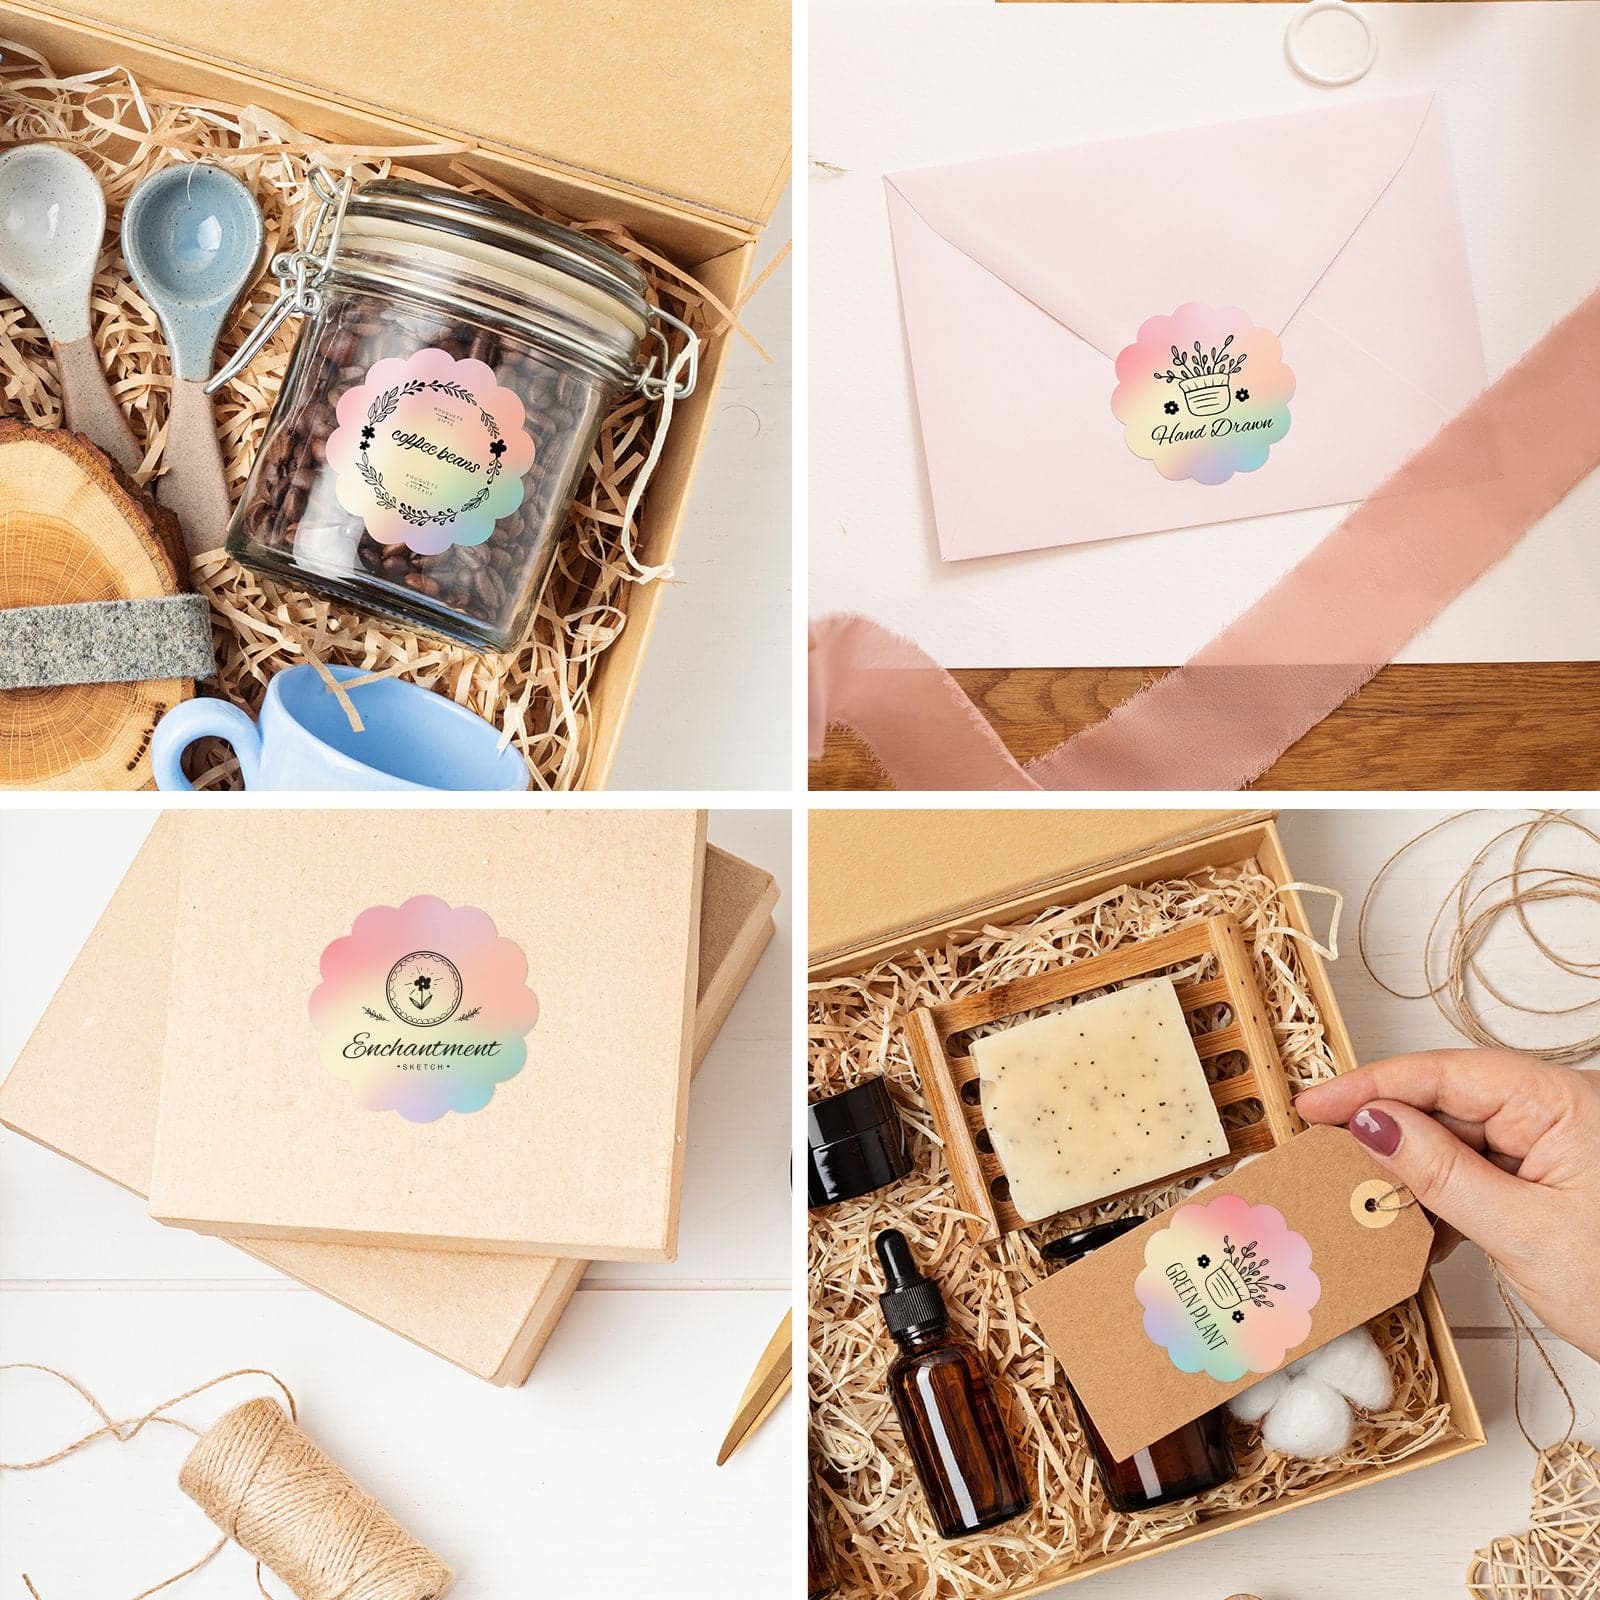 Apply MUNBYN beautiful flower-shaped stickers to glass jars, packages, envelopes, and tags.